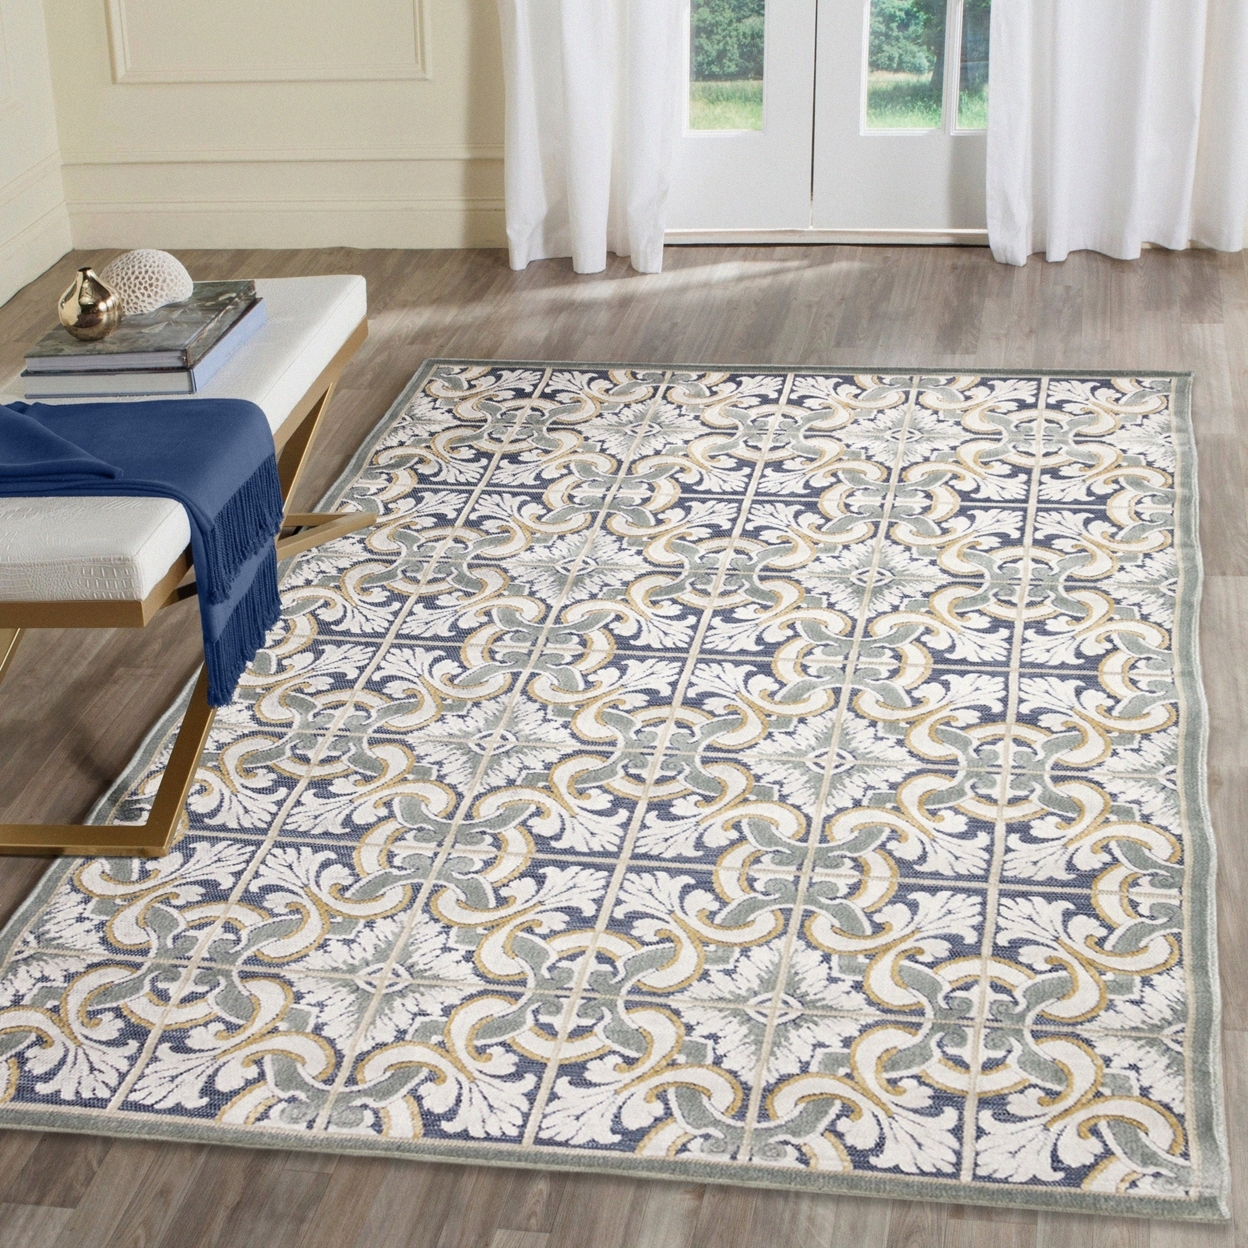 Liora Manne Canyon Floral Tile Indoor Outdoor Area Rug Navy - 7'8 Square